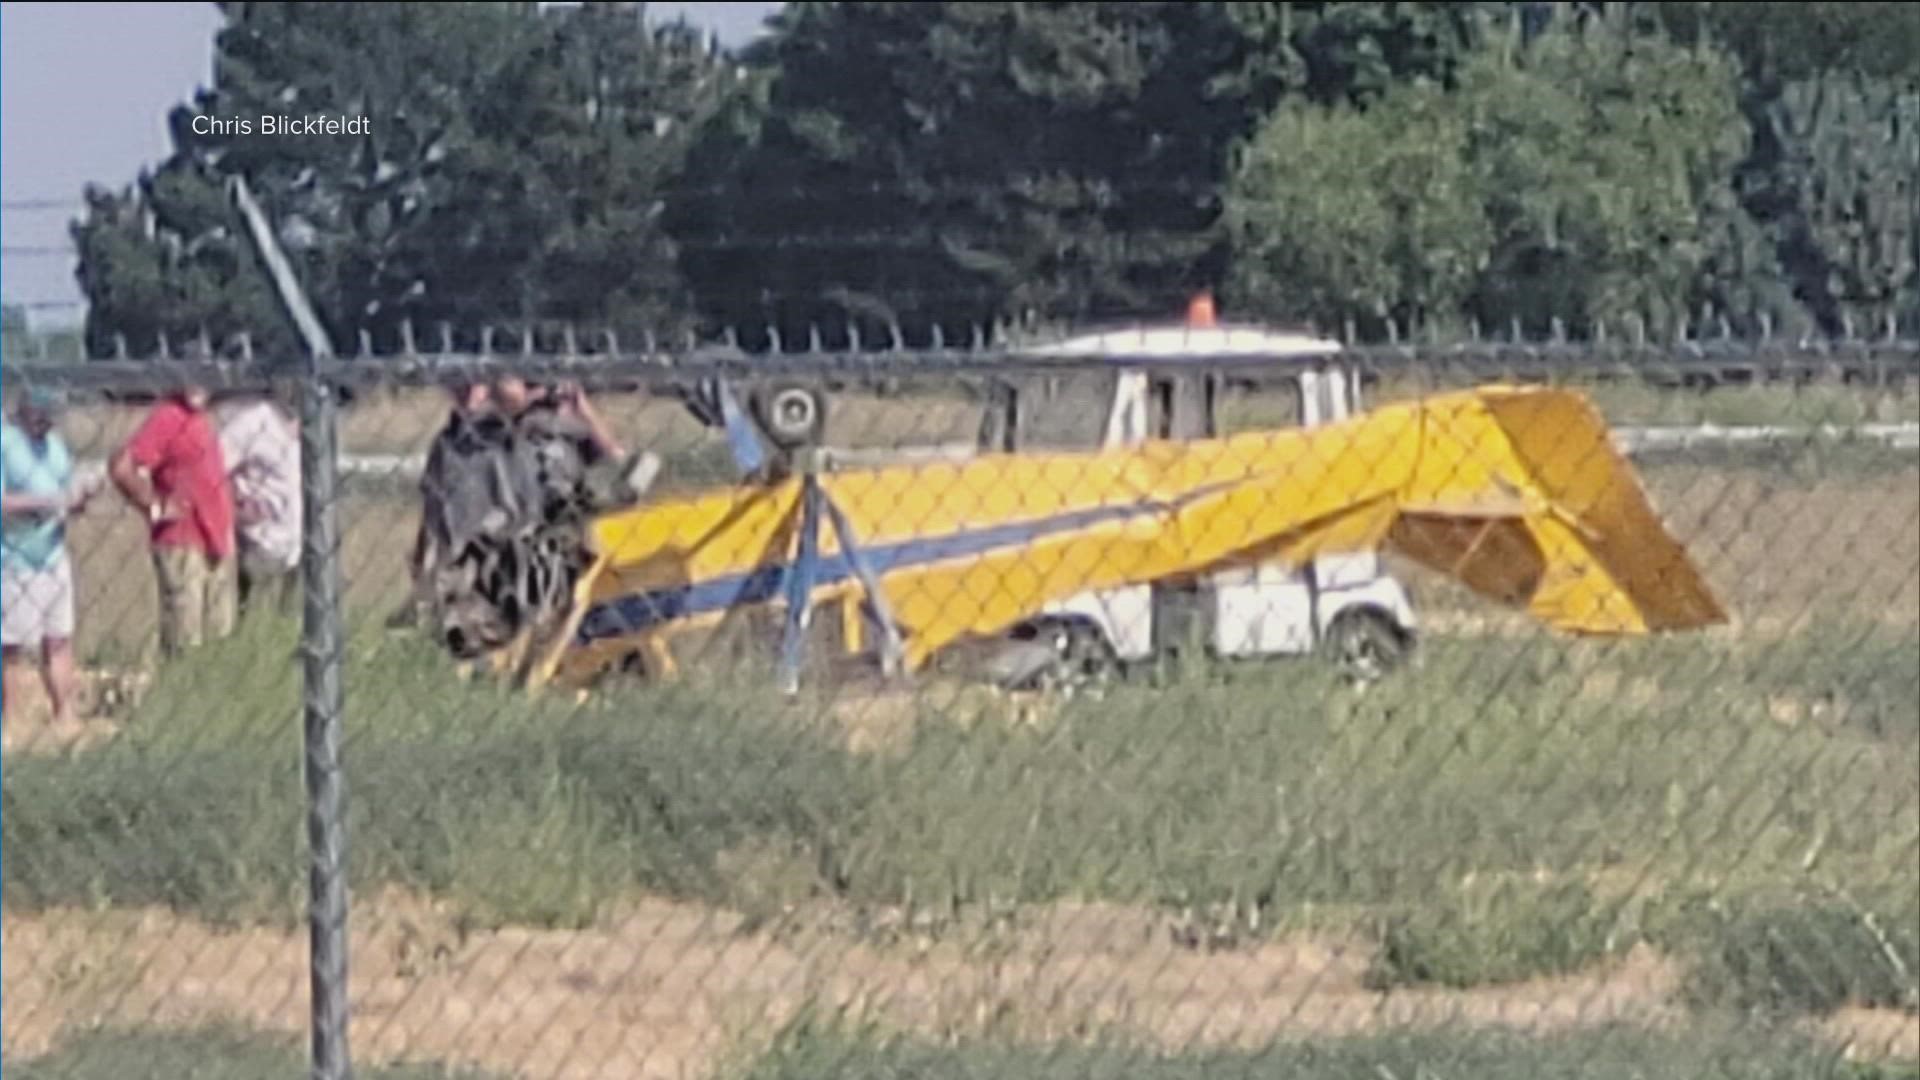 The pilot took off from the airport around 4 p.m., but lost power shortly after takeoff, according to the Caldwell Fire Department.